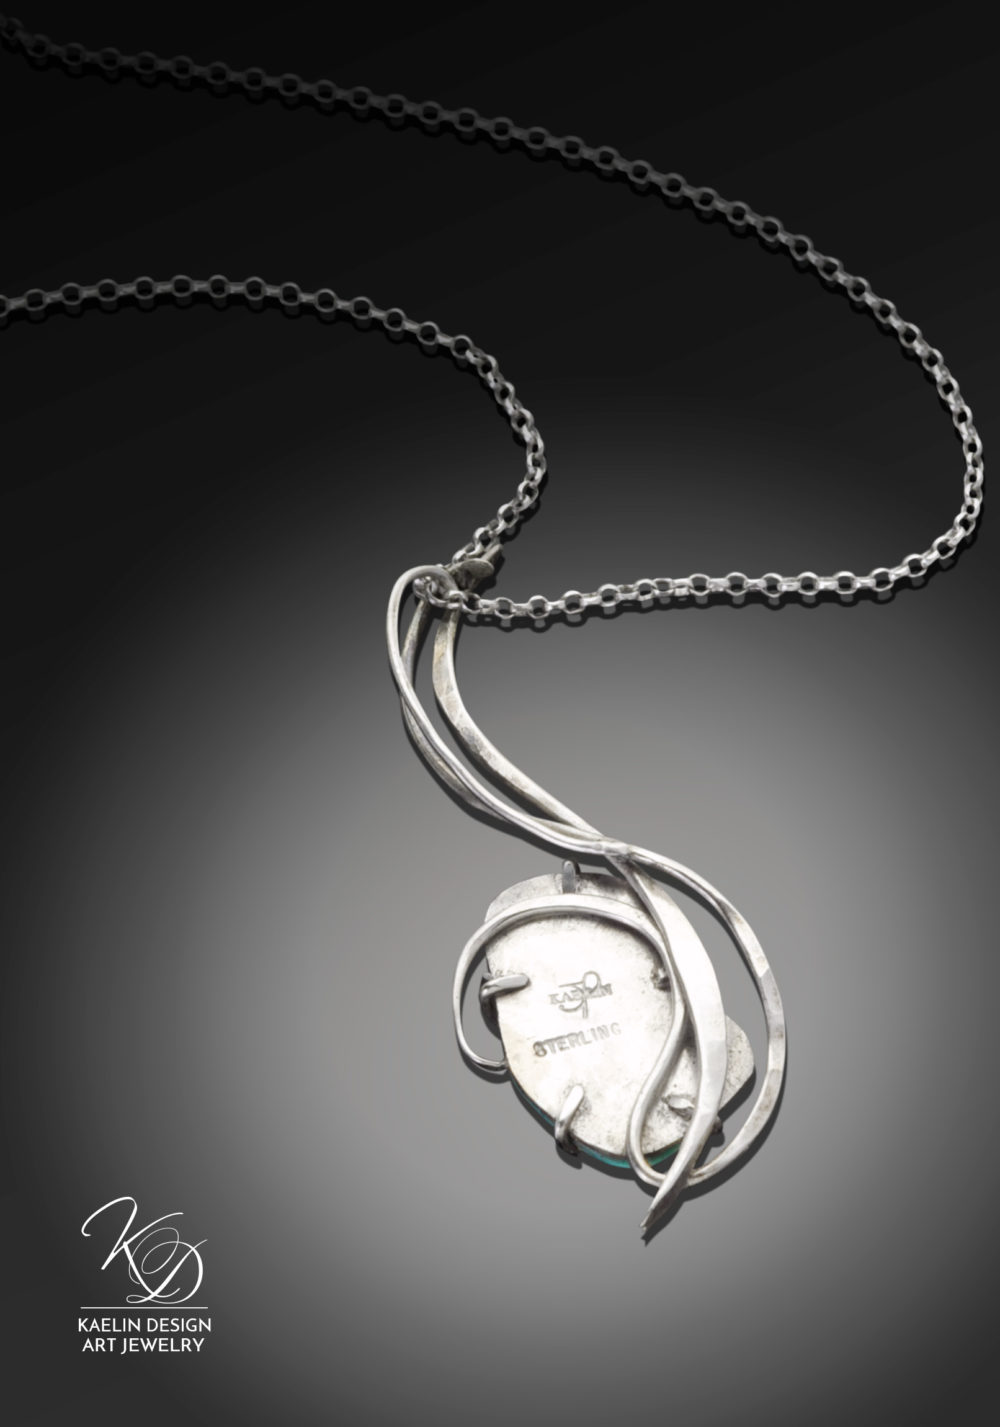 Turquoise Waves forged silver Art Pendant by Kaelin Design